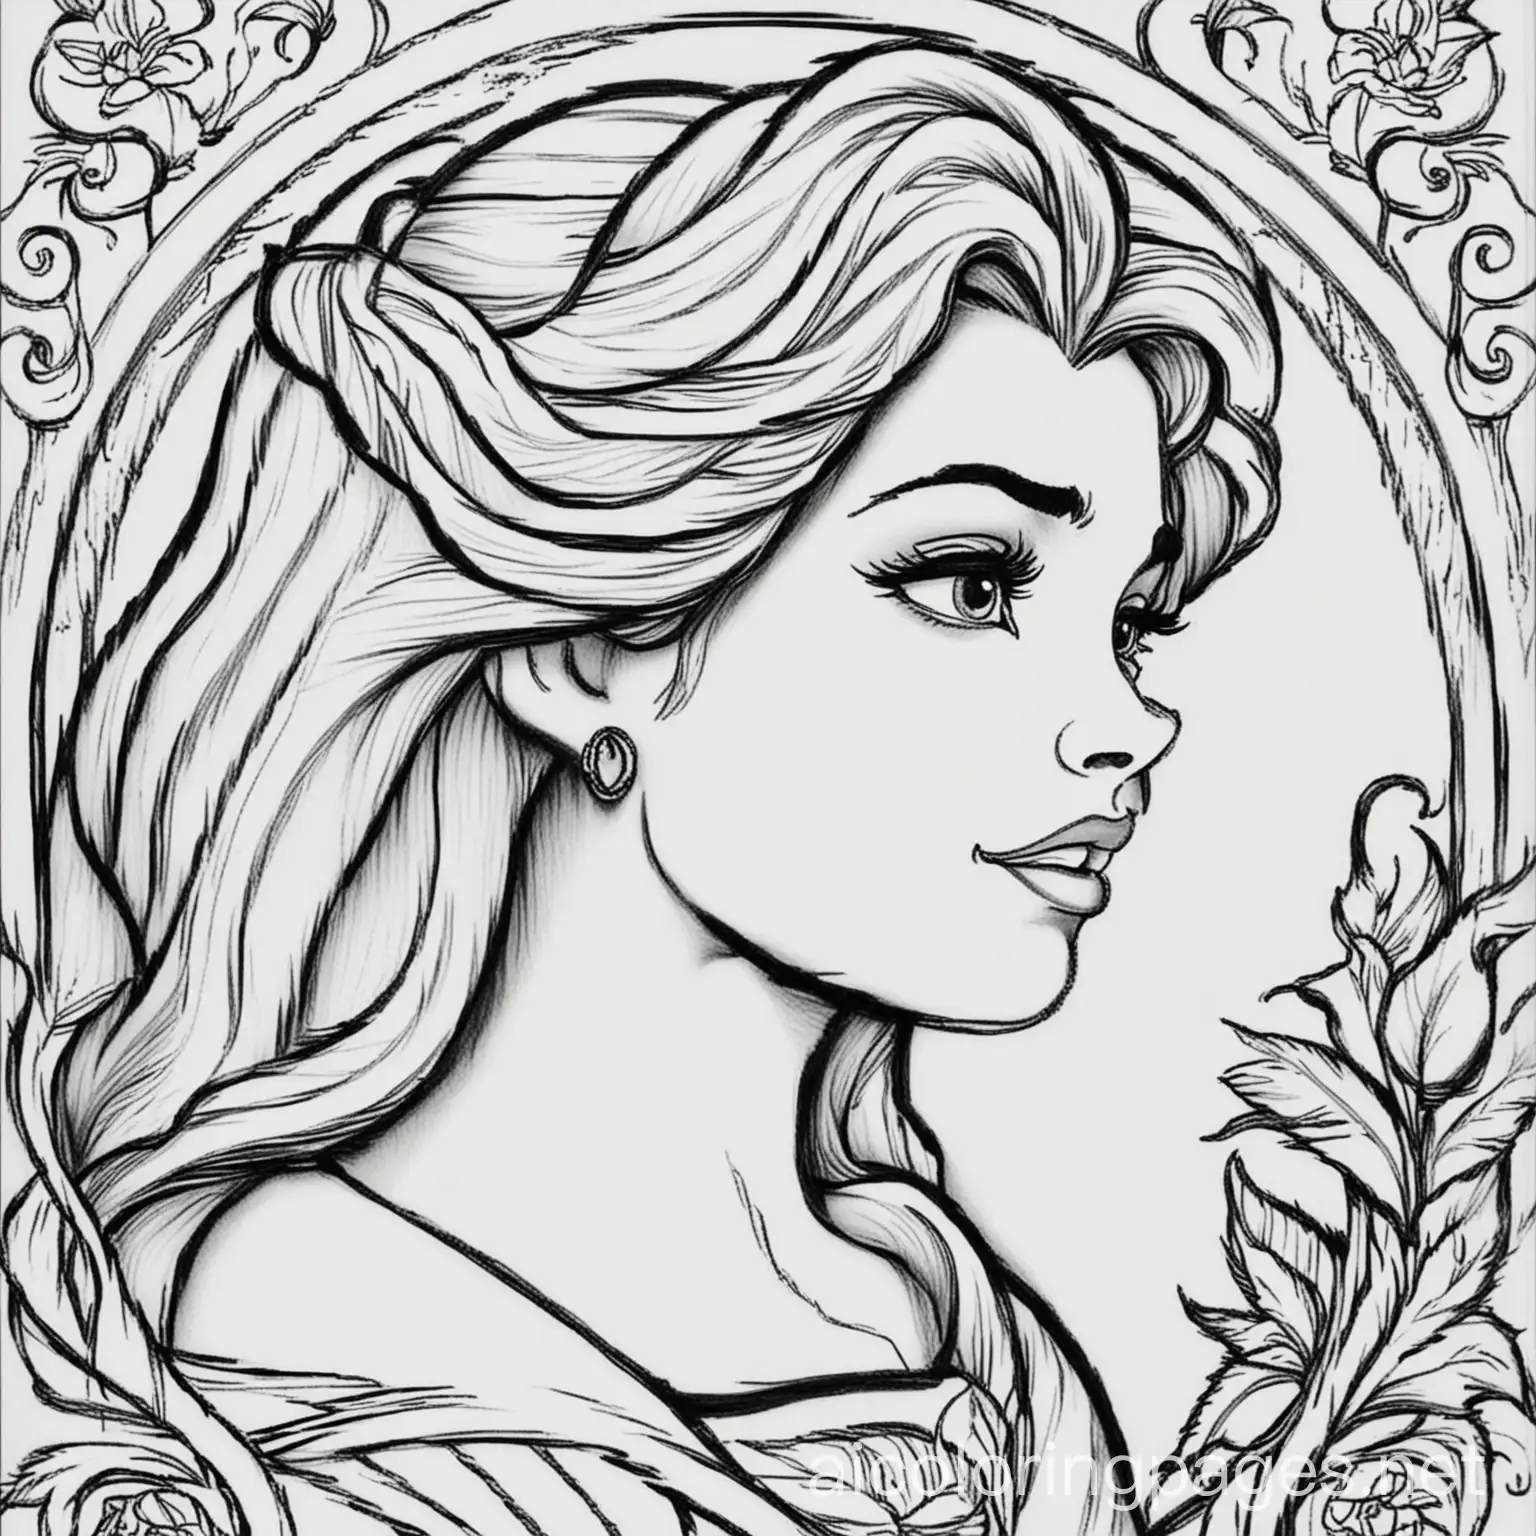 Childrens-Coloring-Page-Fairy-Tale-Castle-in-Black-and-White-Line-Art